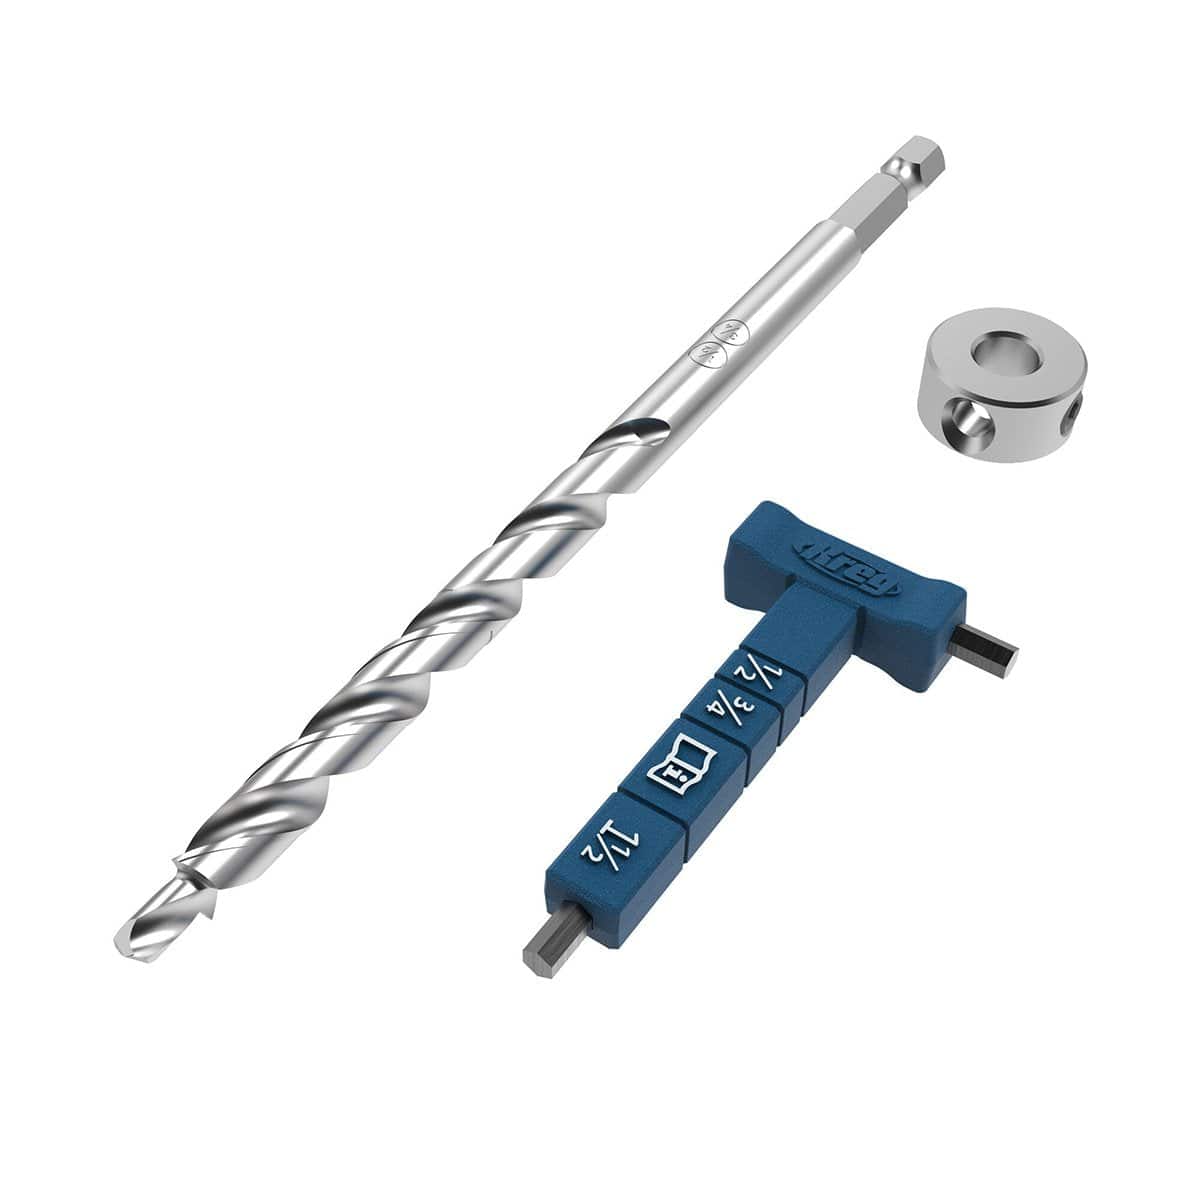 Kreg Tool KPHA540 Joinery Micro-Pocket™ Drill Bit with Stop Collar & Hex Wrench